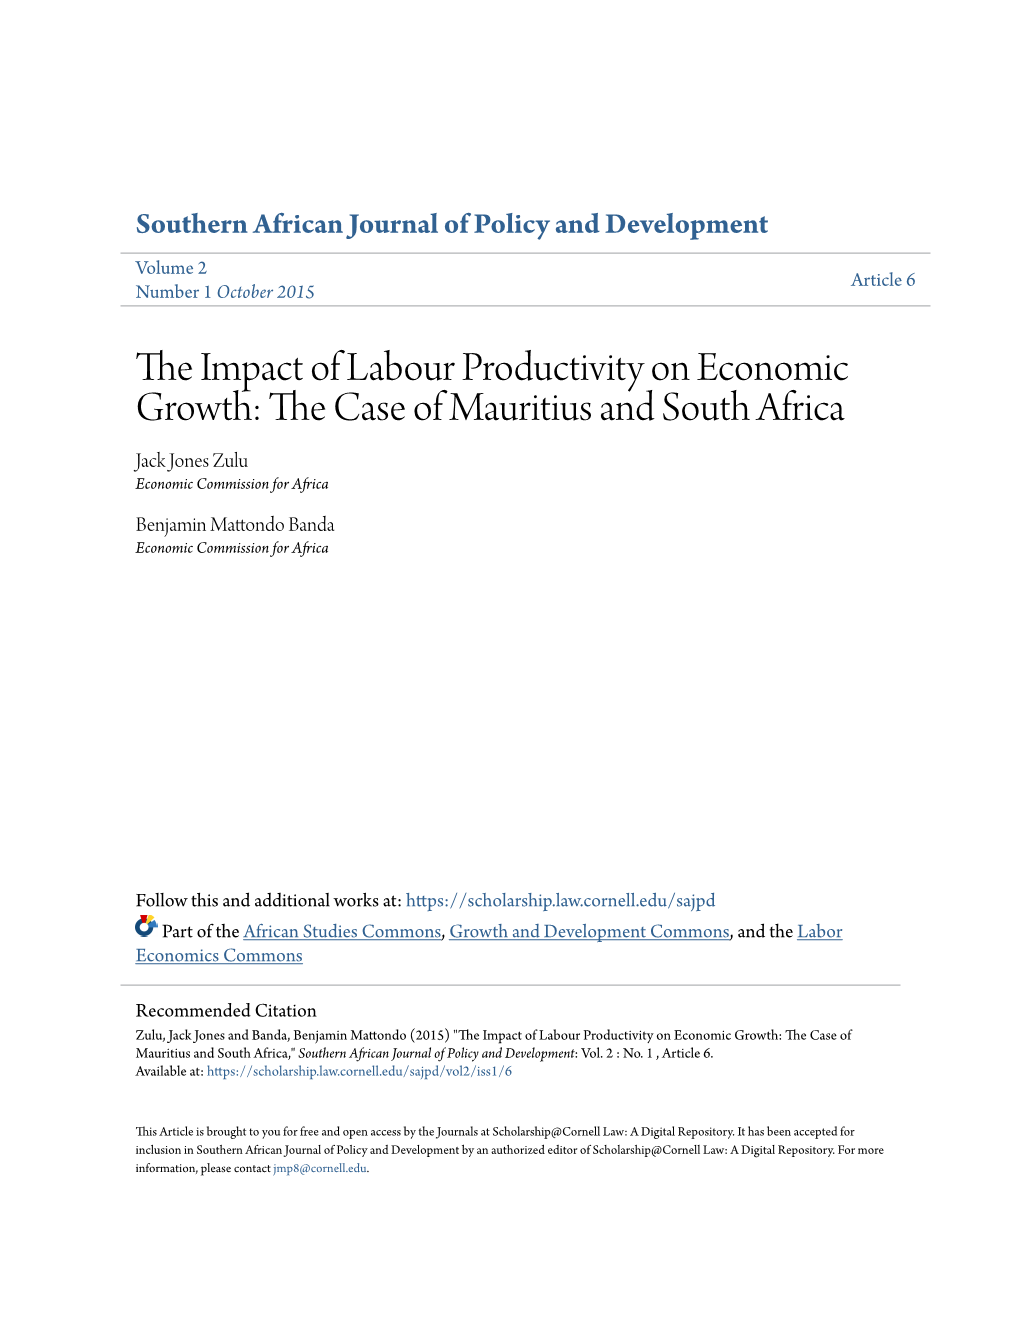 The Impact of Labour Productivity on Economic Growth: the Case of Mauritius and South Africa